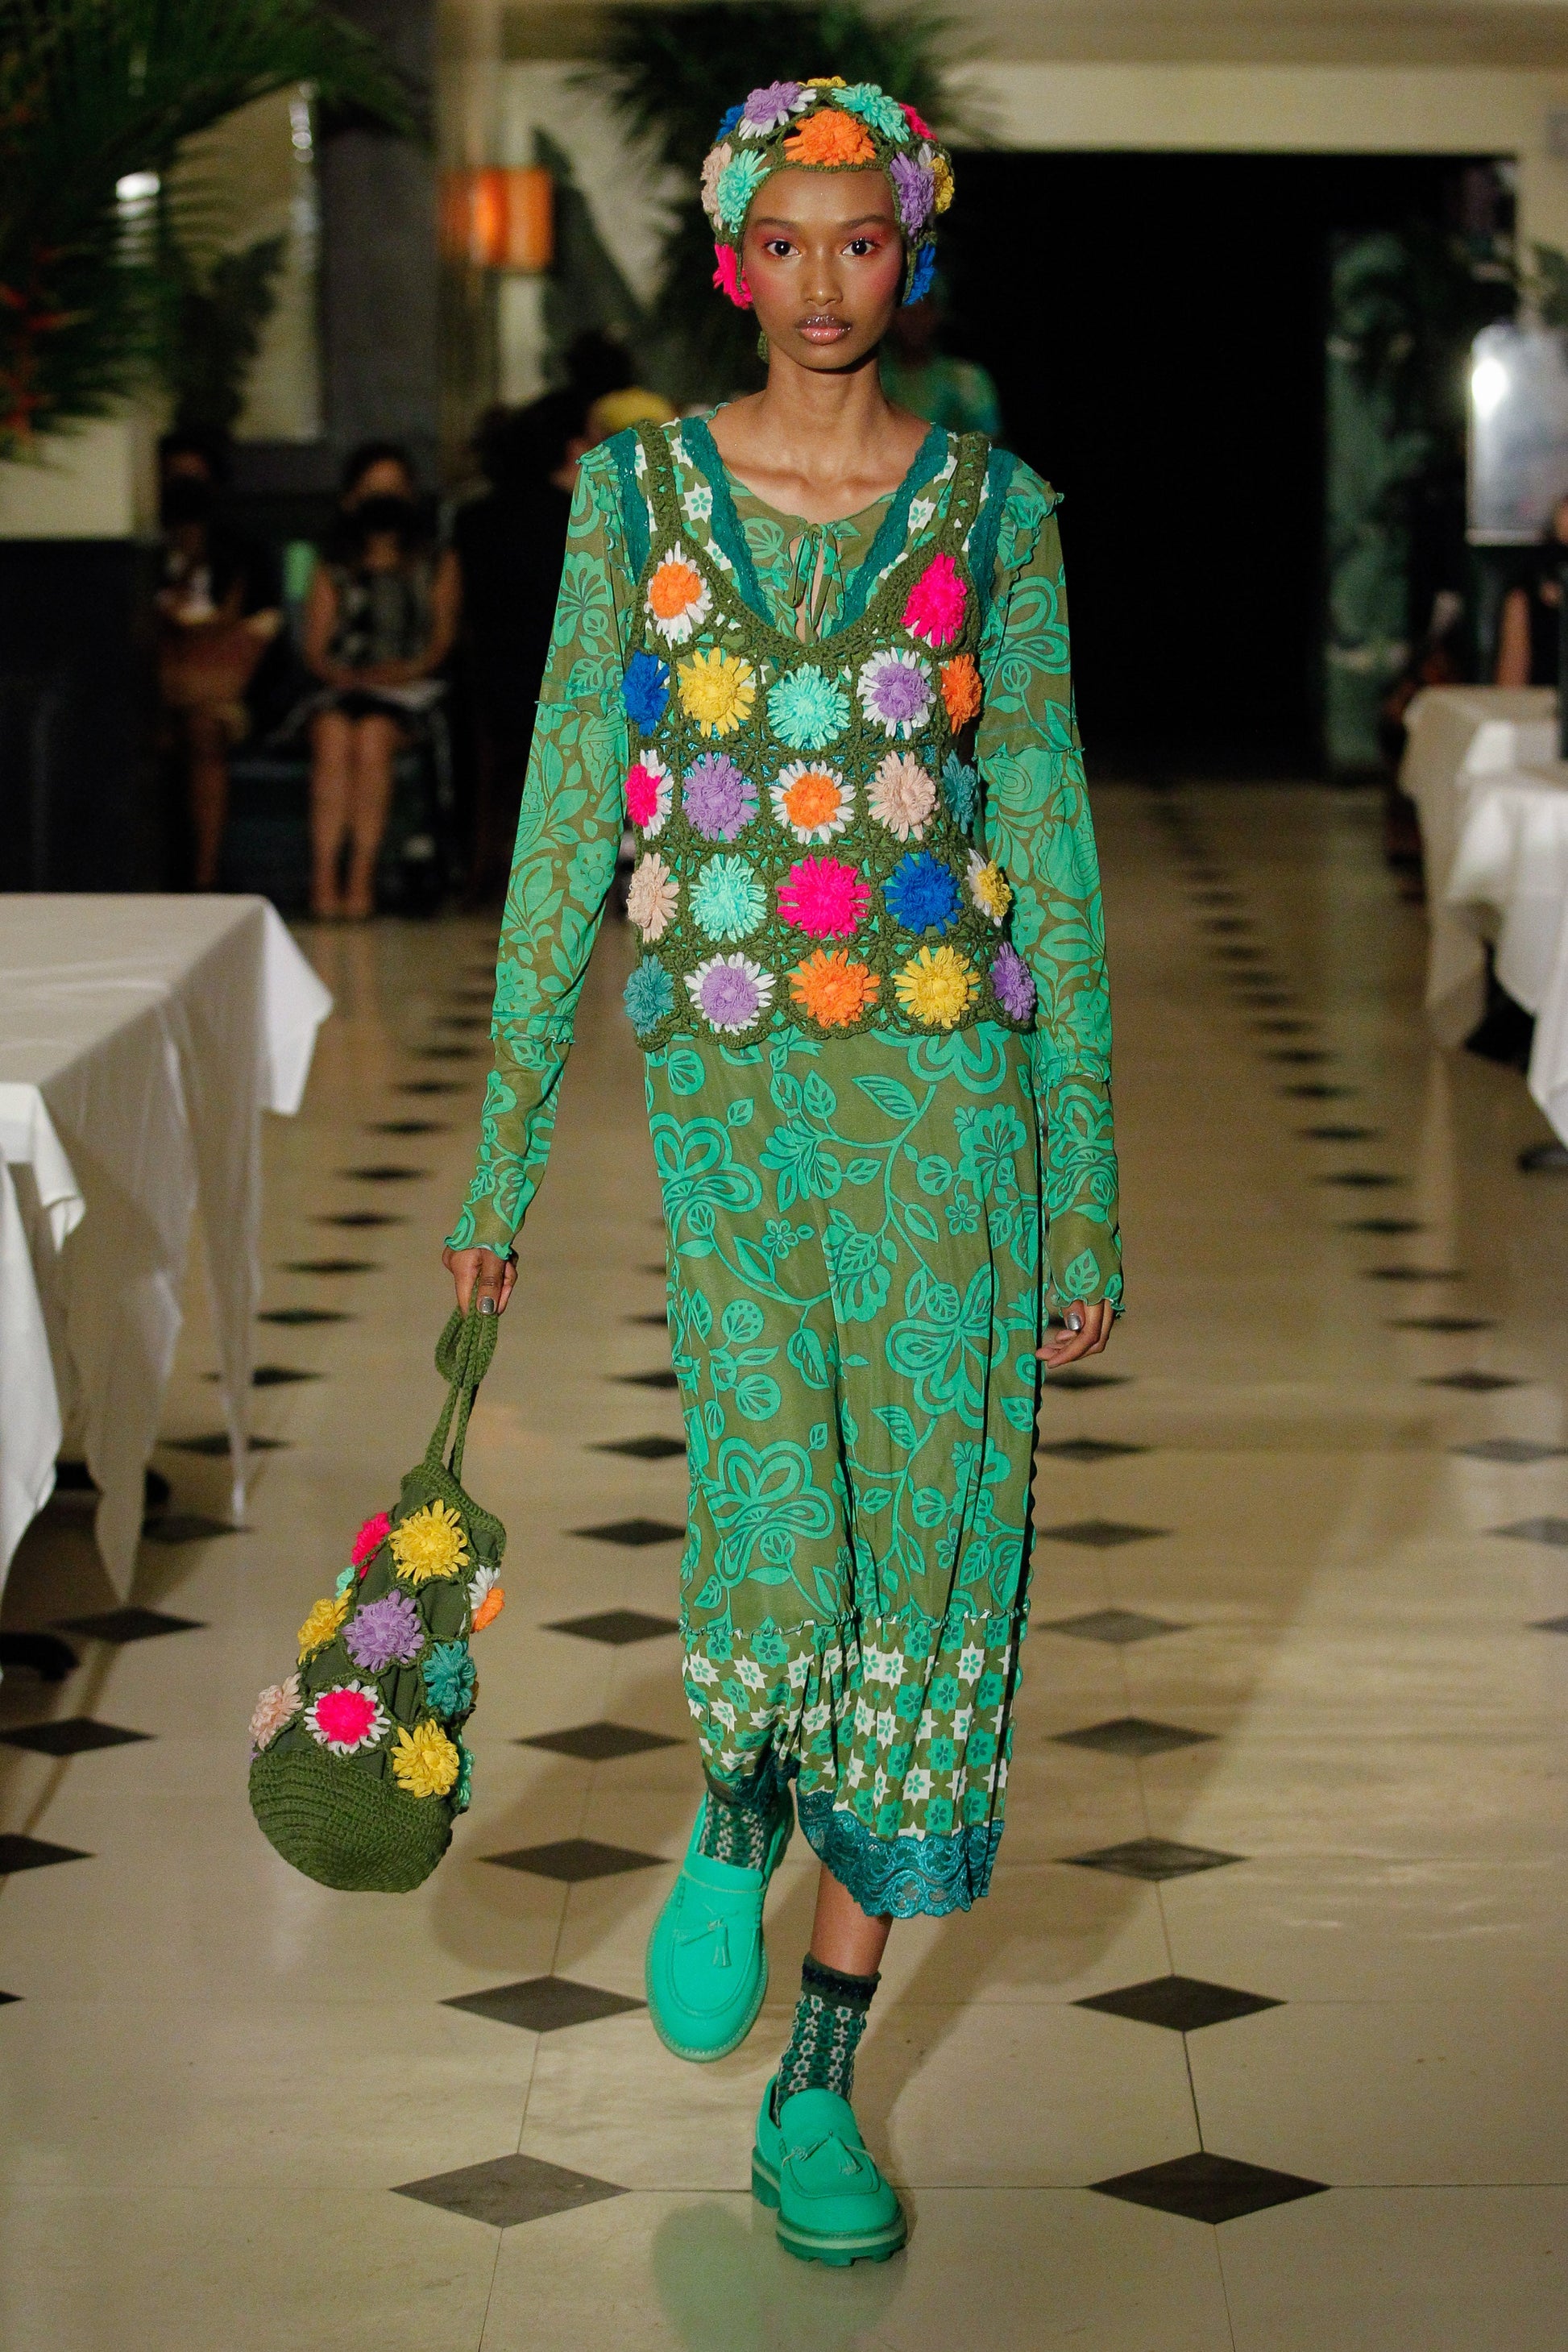 On the runway, Rainbow 3D Floral Hand Crochet Bag, multicolored flowers on a military green